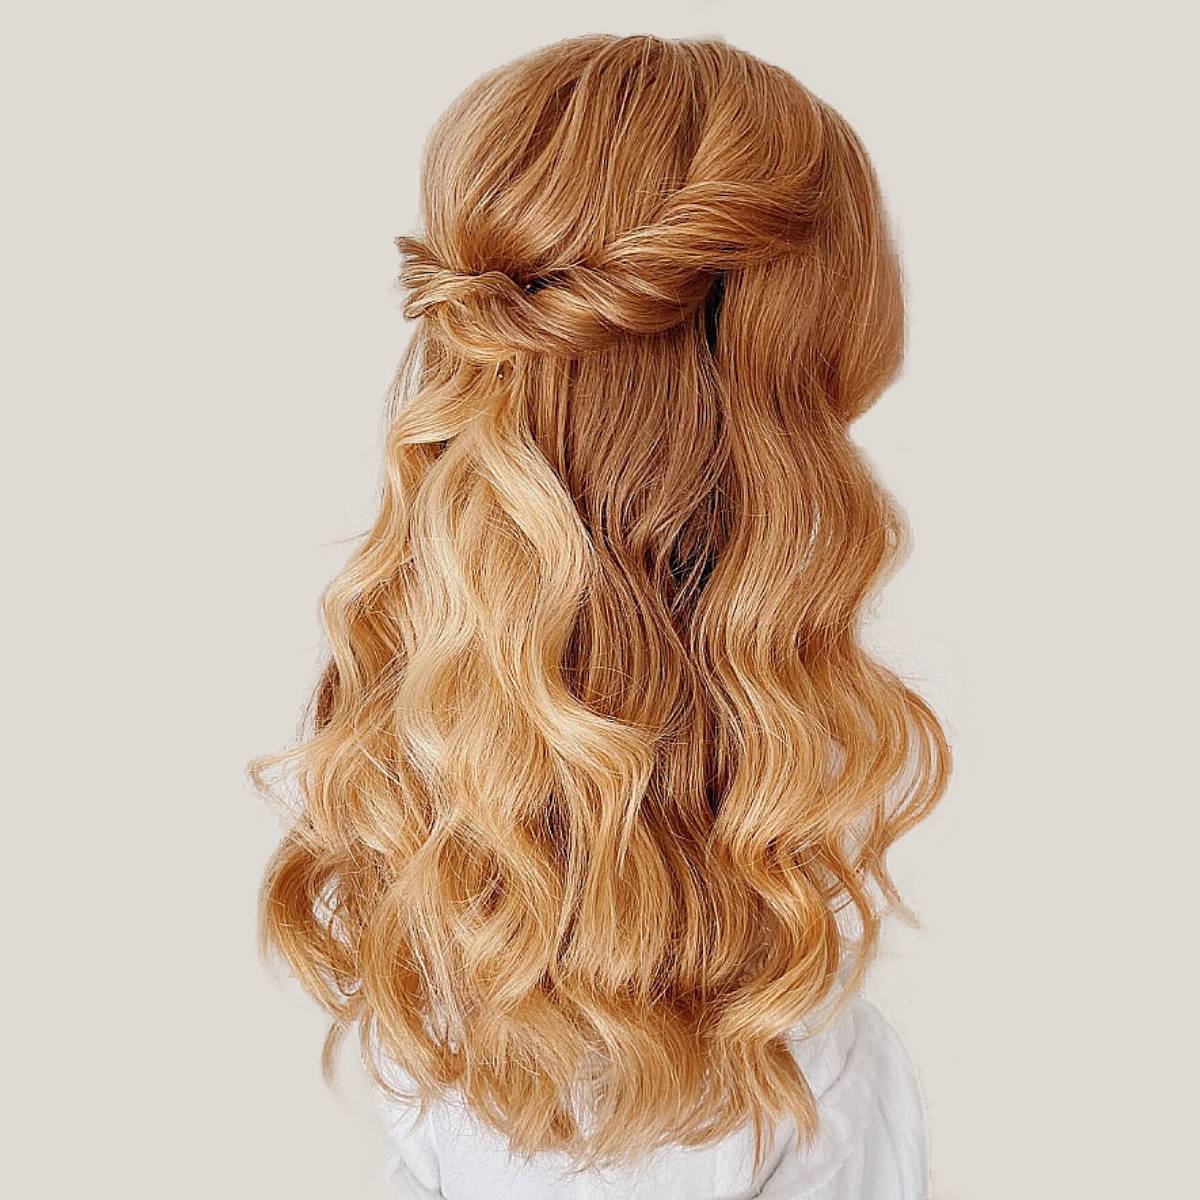 65 Strawberry Blonde Hair Color Ideas to Try | Hair.com By L'Oréal